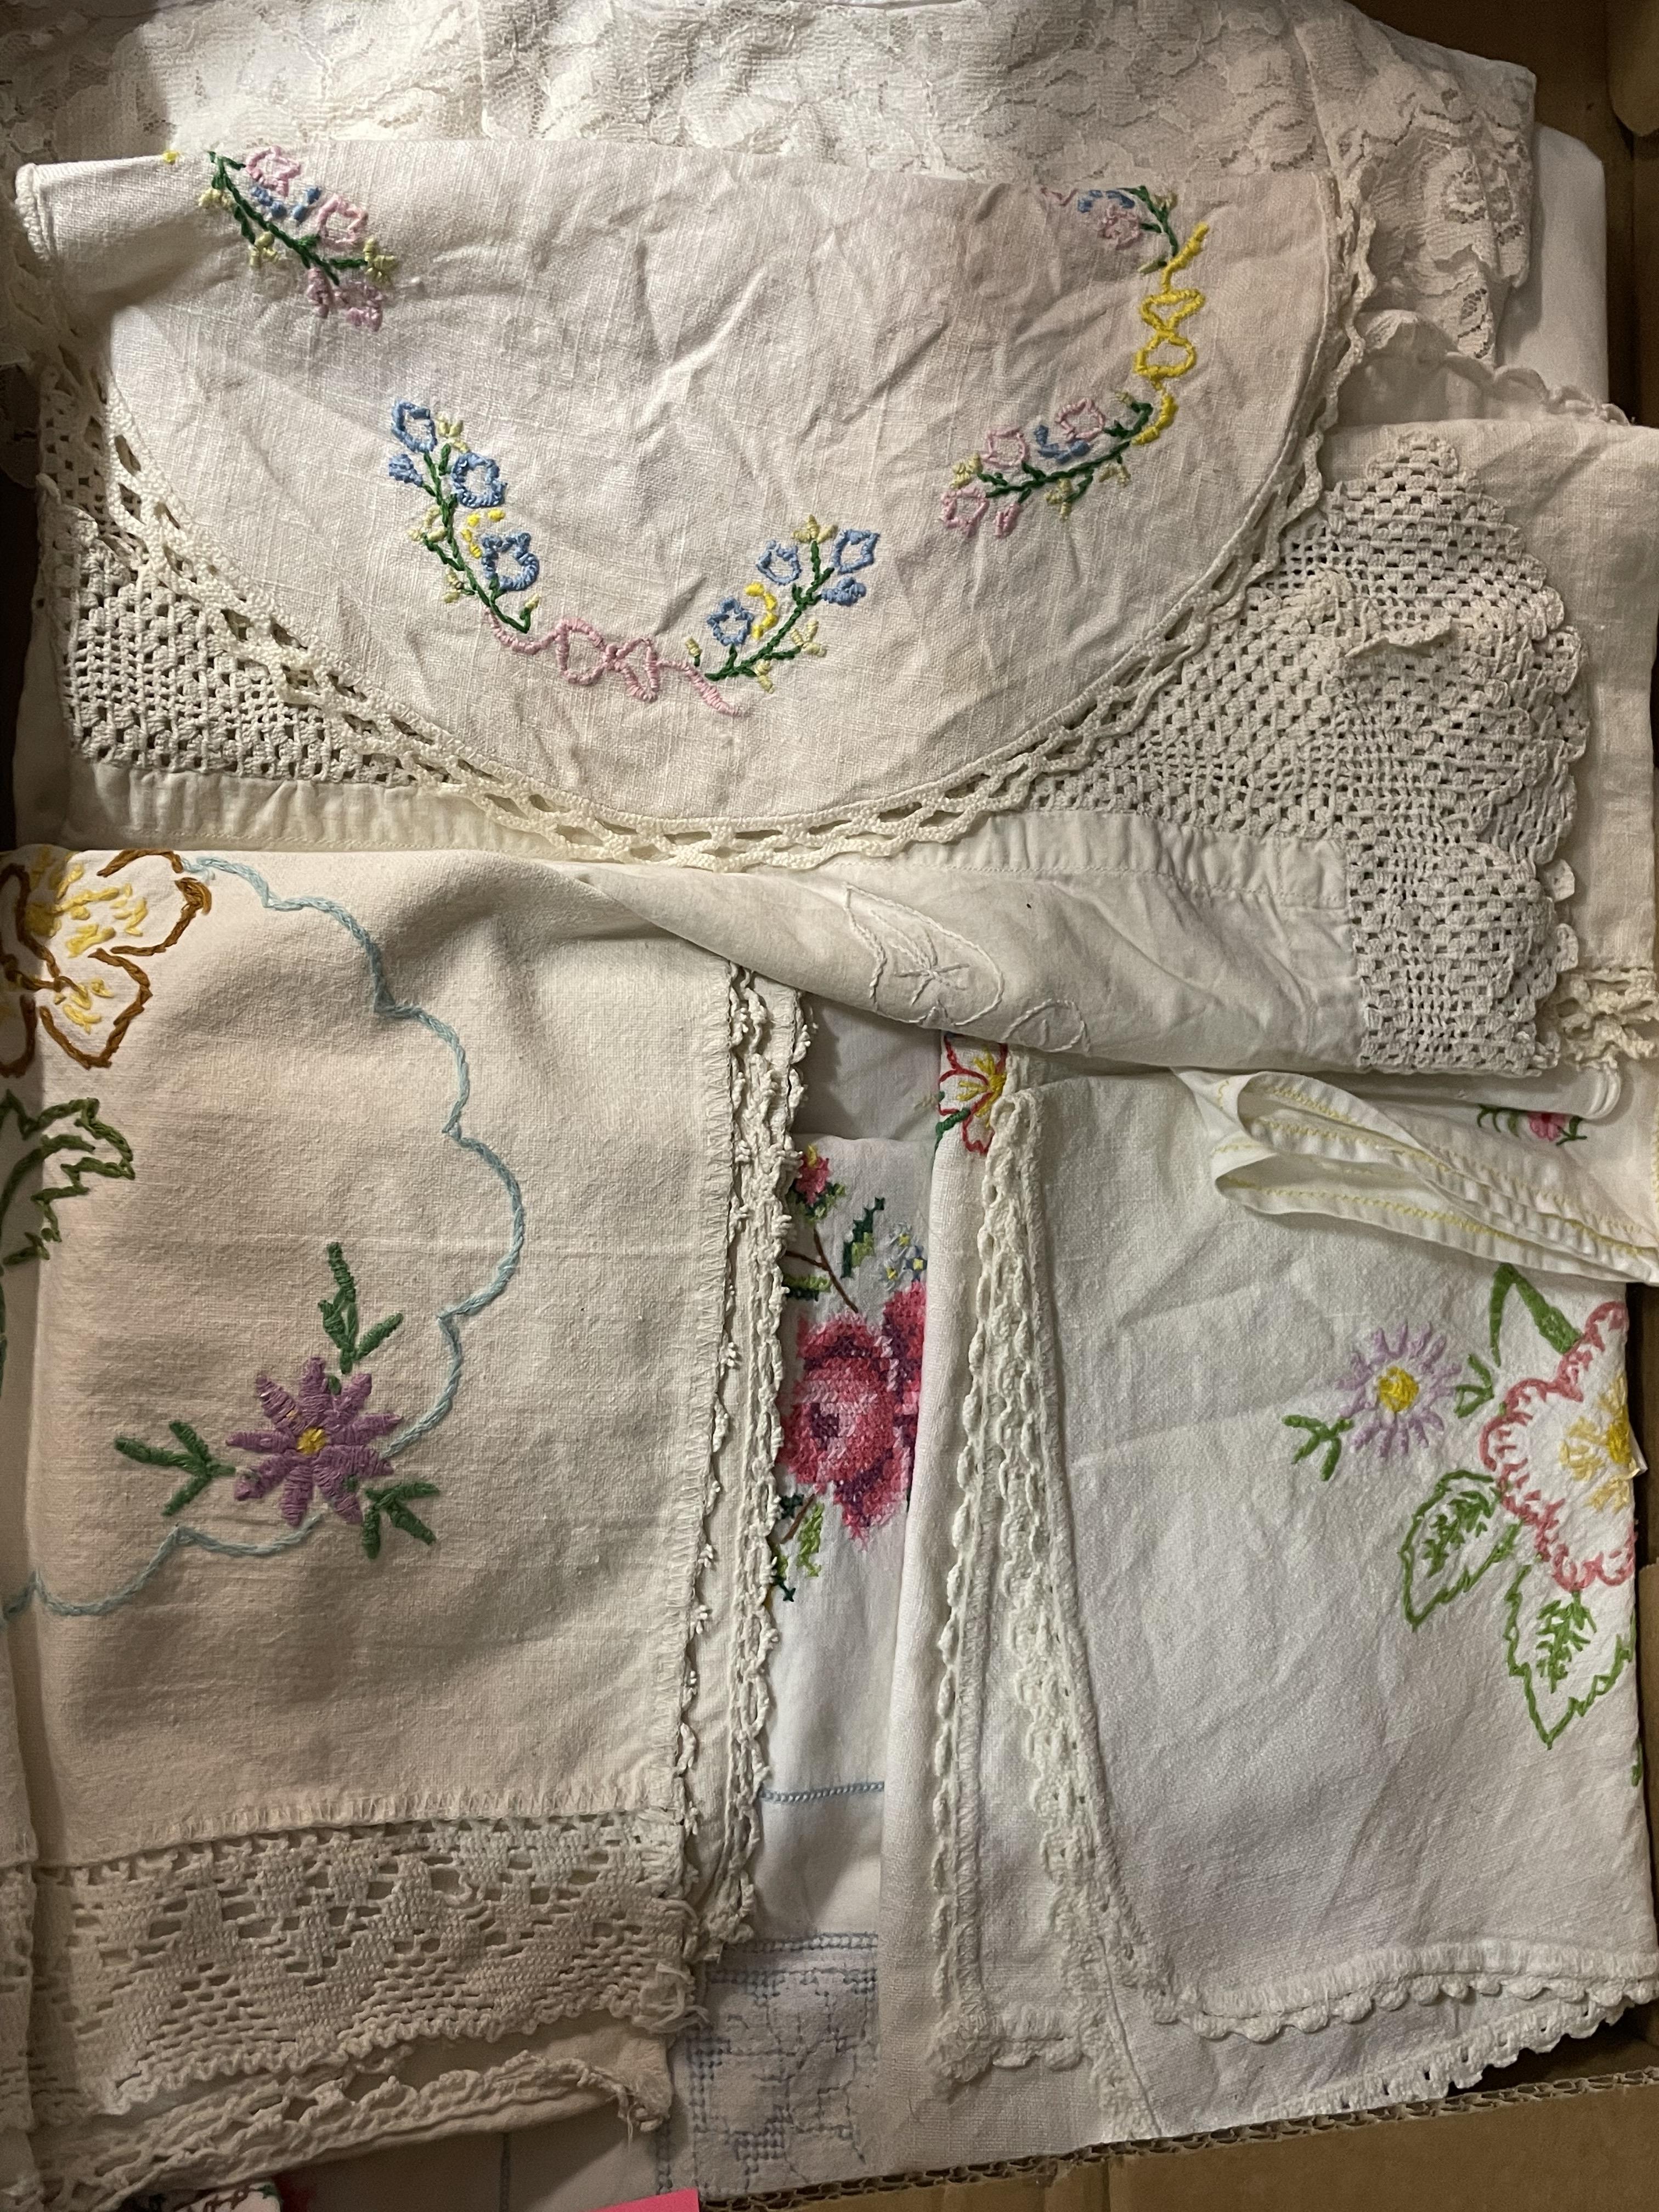 CARTON OF EMBROIDERED LACE AND TABLE LINENS - Image 2 of 2